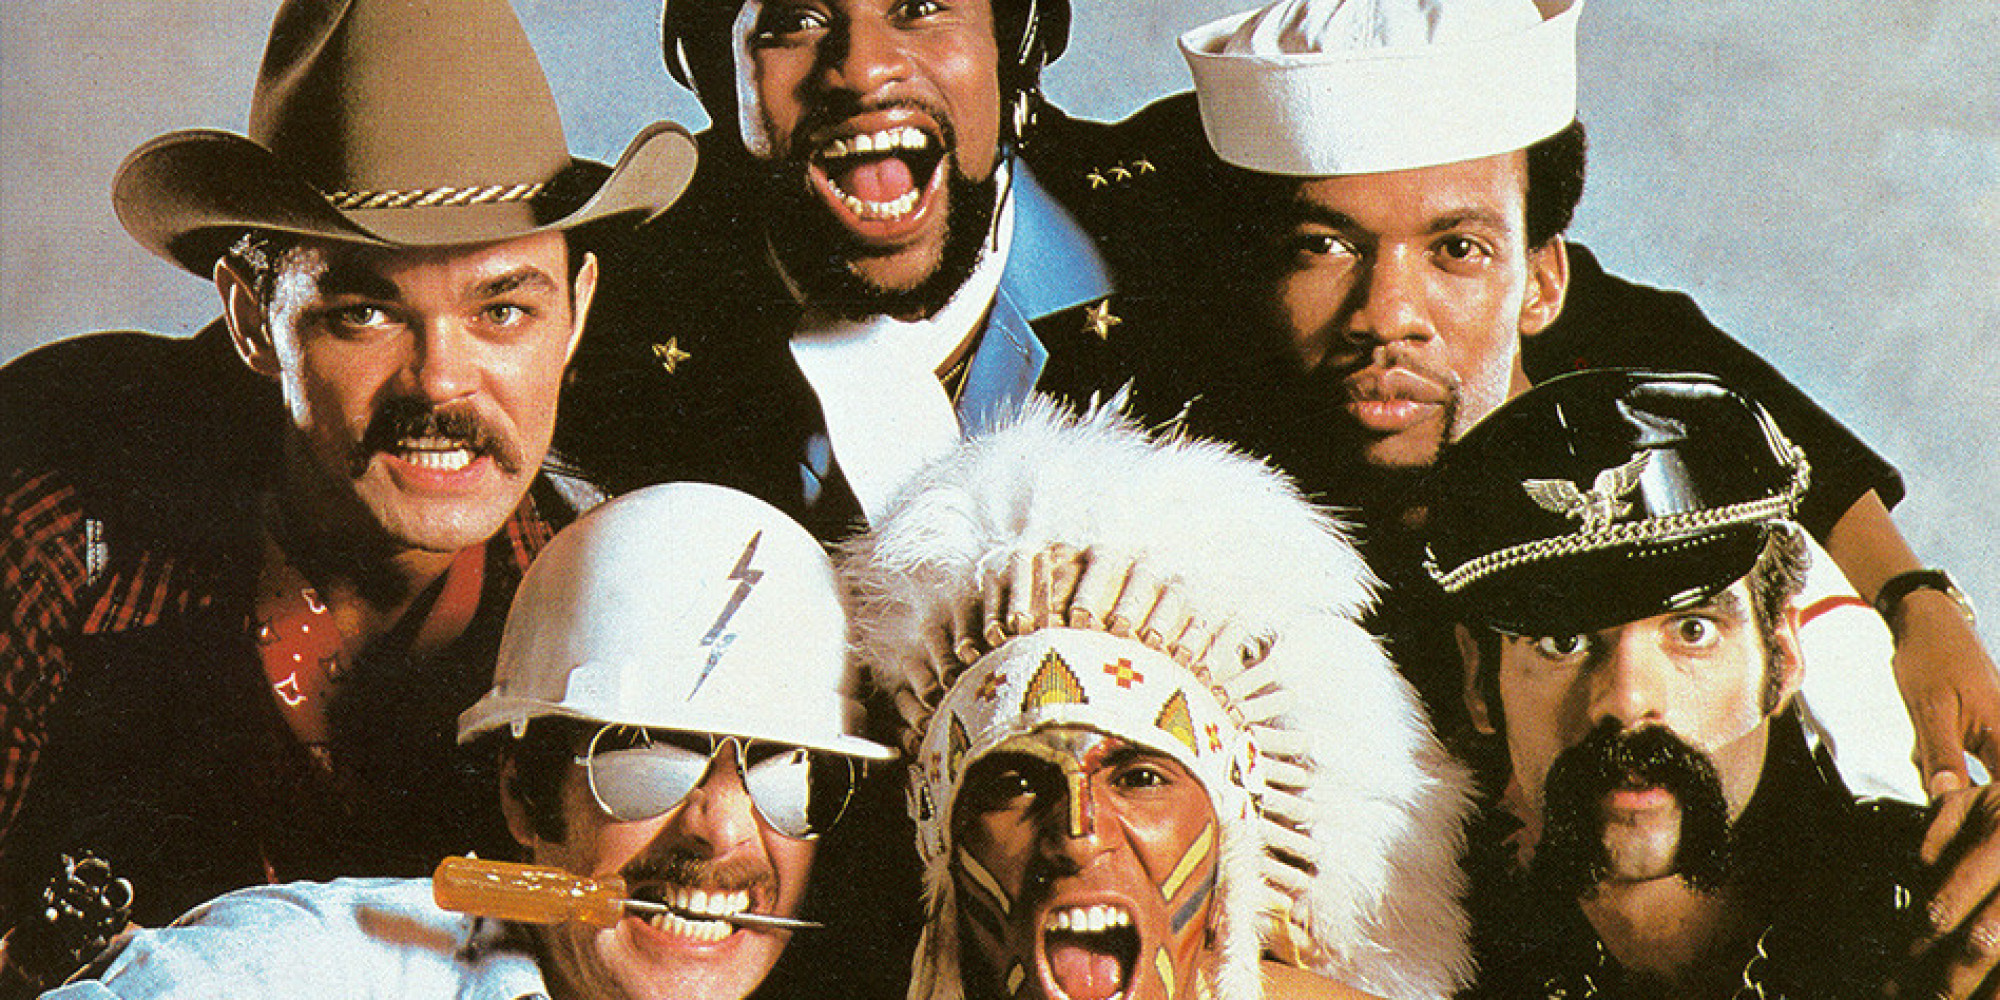 The Village People Talk About The Origin Of Disco Classic 'Y.M.C.A